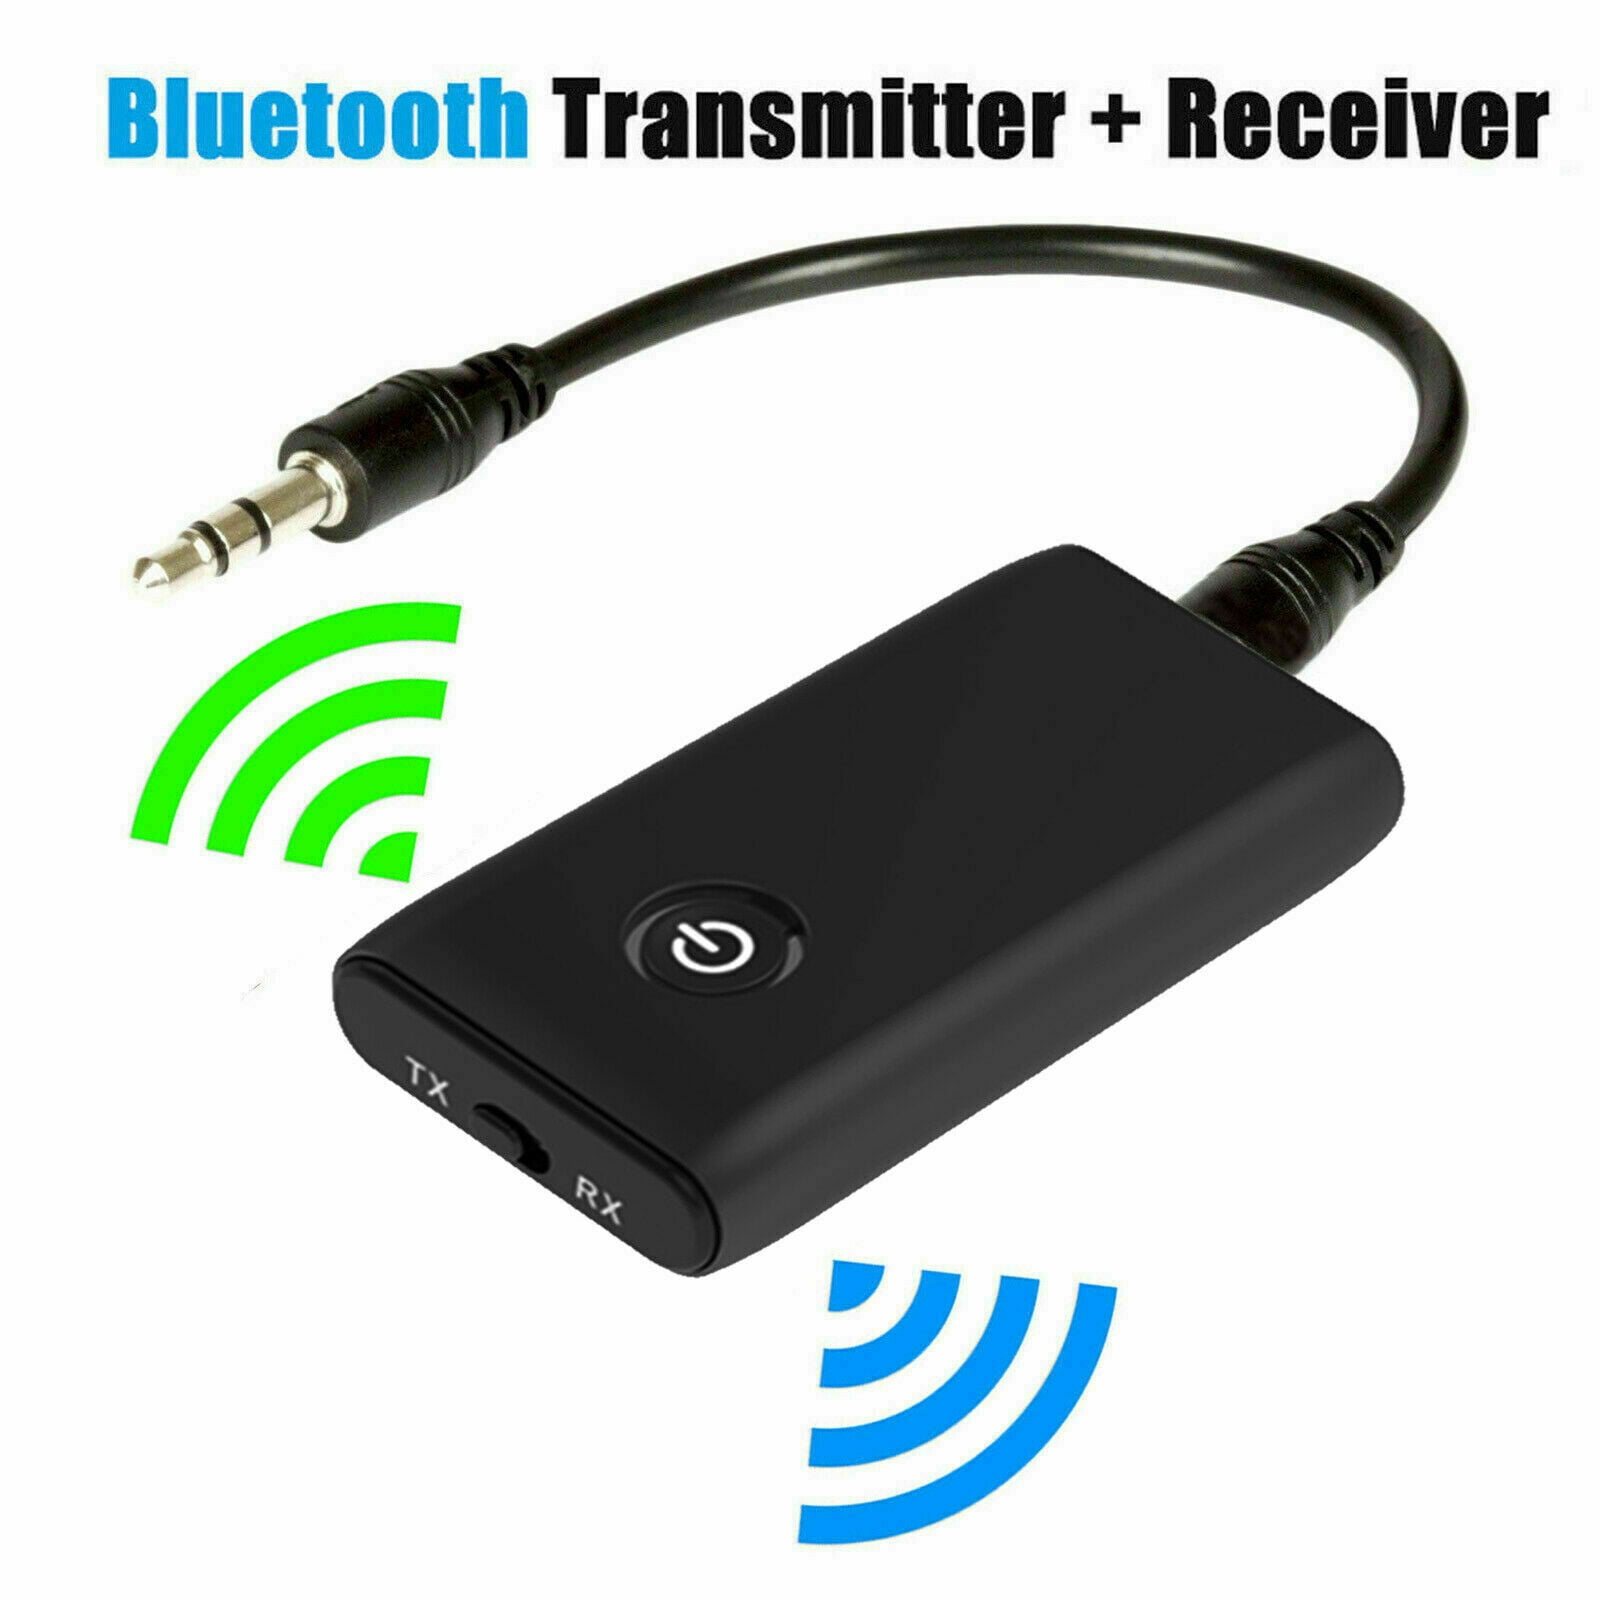 Plug & Play Golvery Long Range Bluetooth 5.0 Transmitter Receiver for TV with Audio Pass-Thru Feature AUX Optical Wireless Adapter for Home Stereo Supports AptX Low Latency/HD Dual Stream